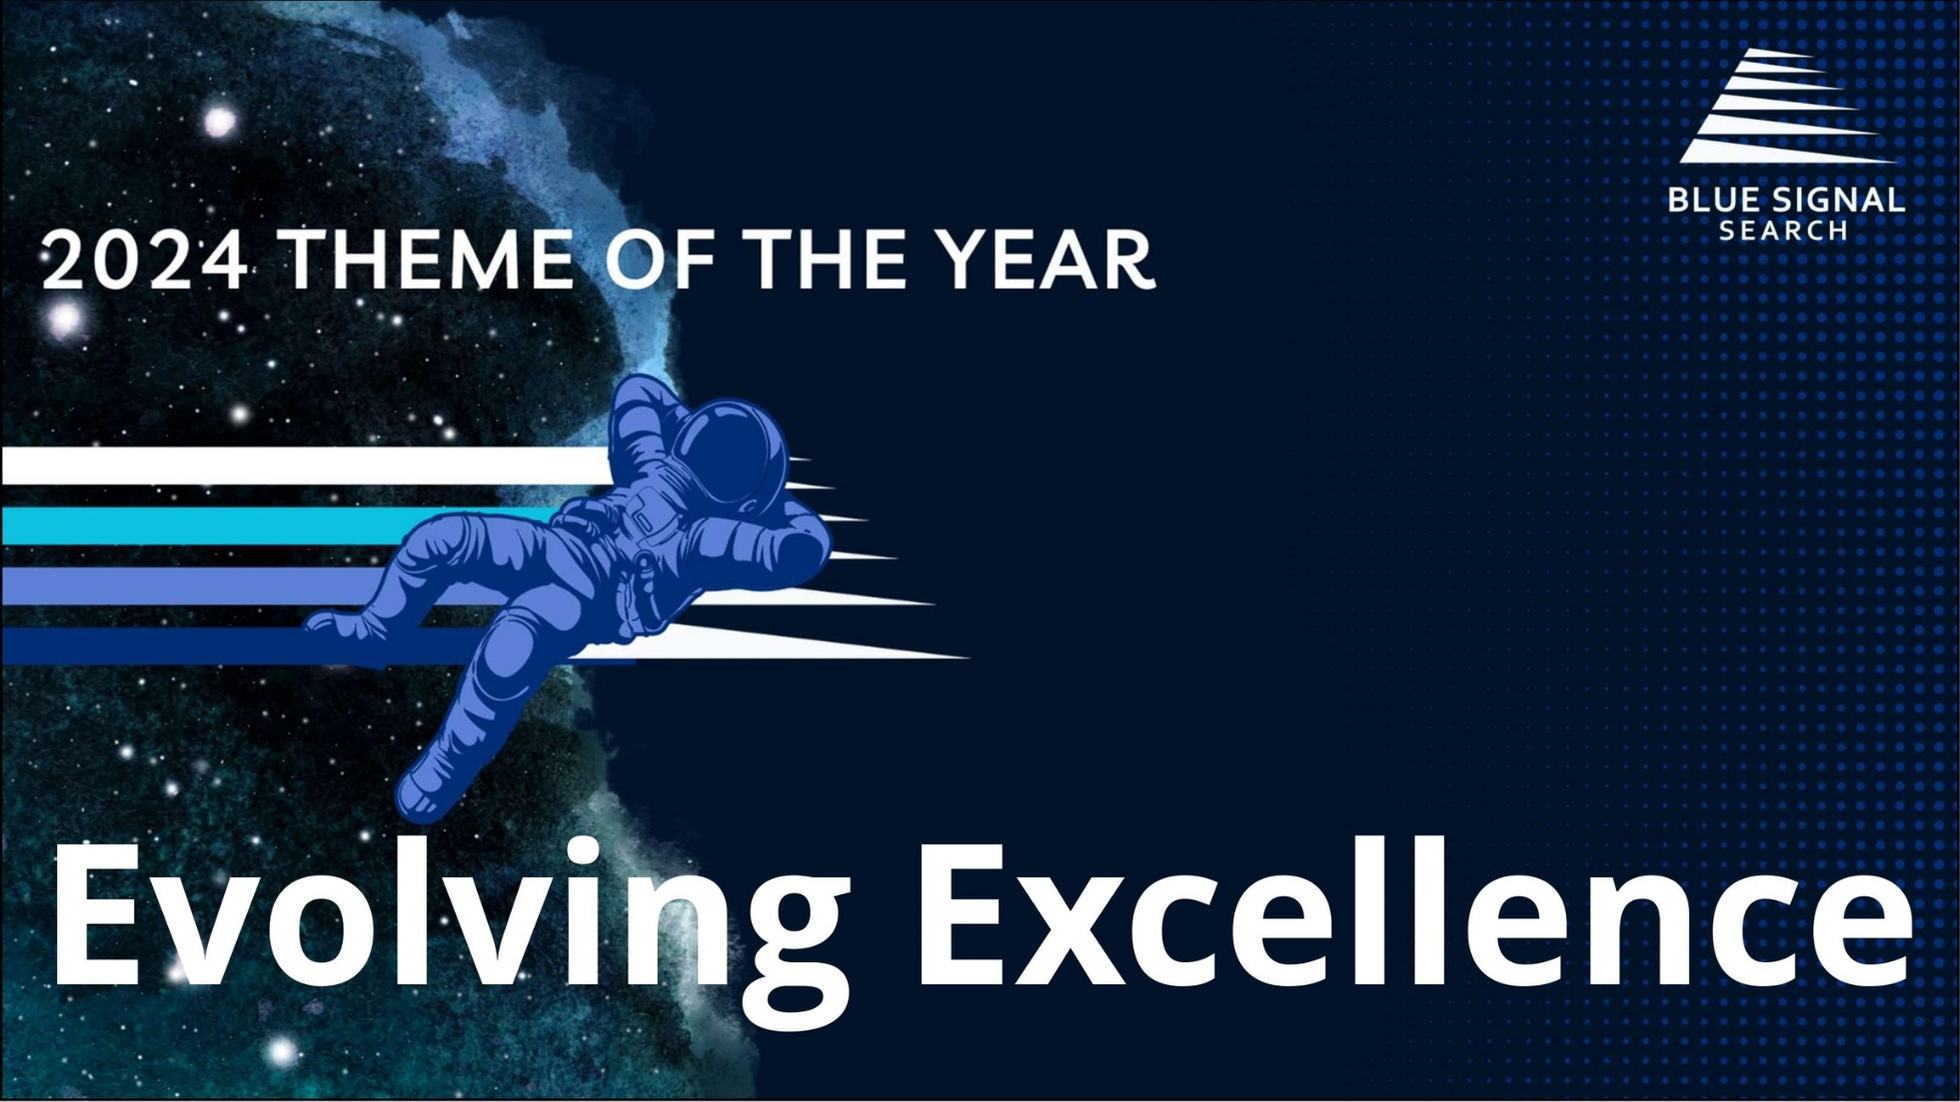 The 2024 theme 'Evolving Excellence' presented against a backdrop of an astronaut floating in space.